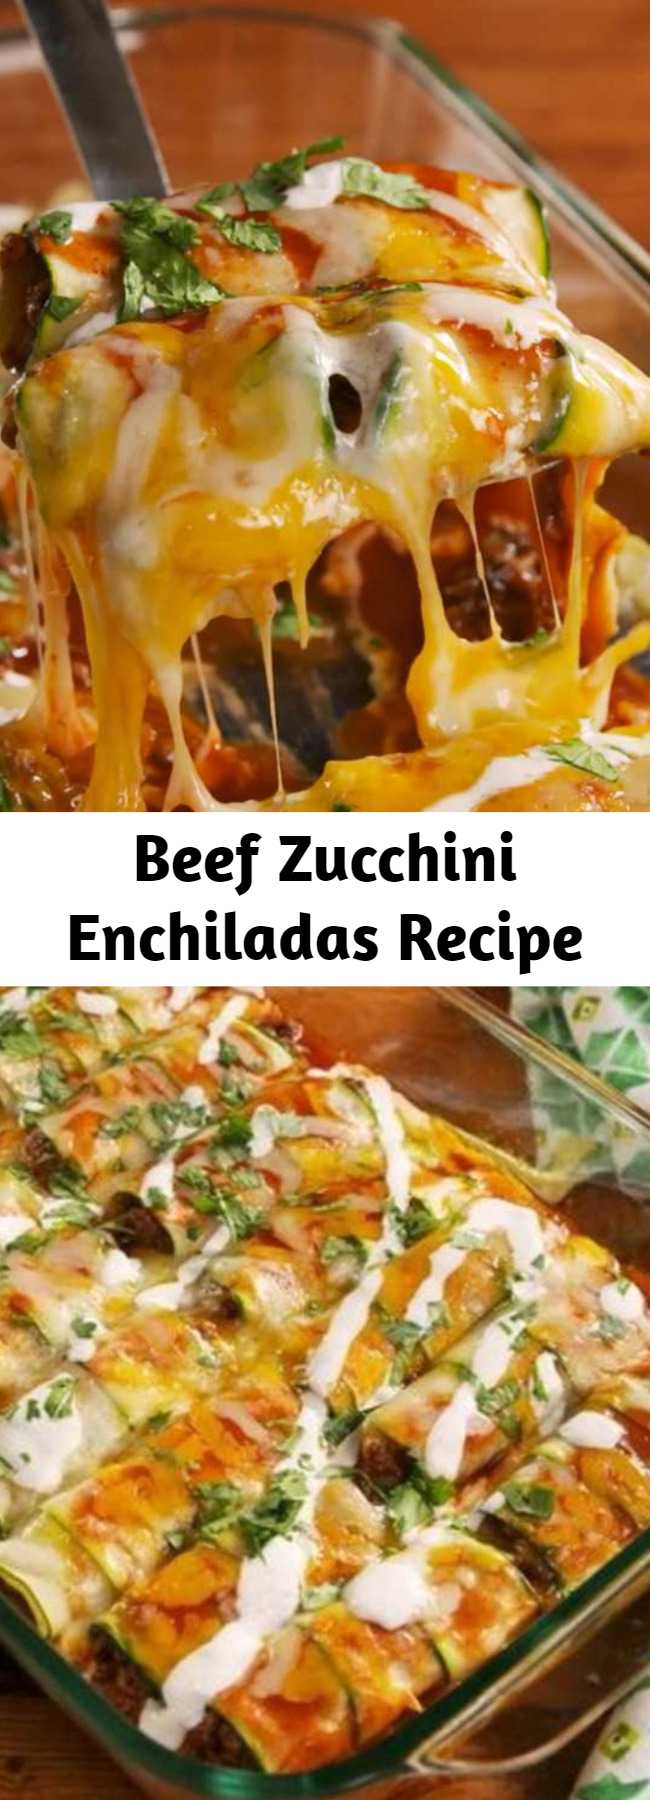 Beef Zucchini Enchiladas Recipe - Zucchini can do it all and these enchiladas prove it! It's much easier to roll up than you would imaging making these so fun to make. #lowcarb #zucchini #healthyenchiladas #healthyrecipes